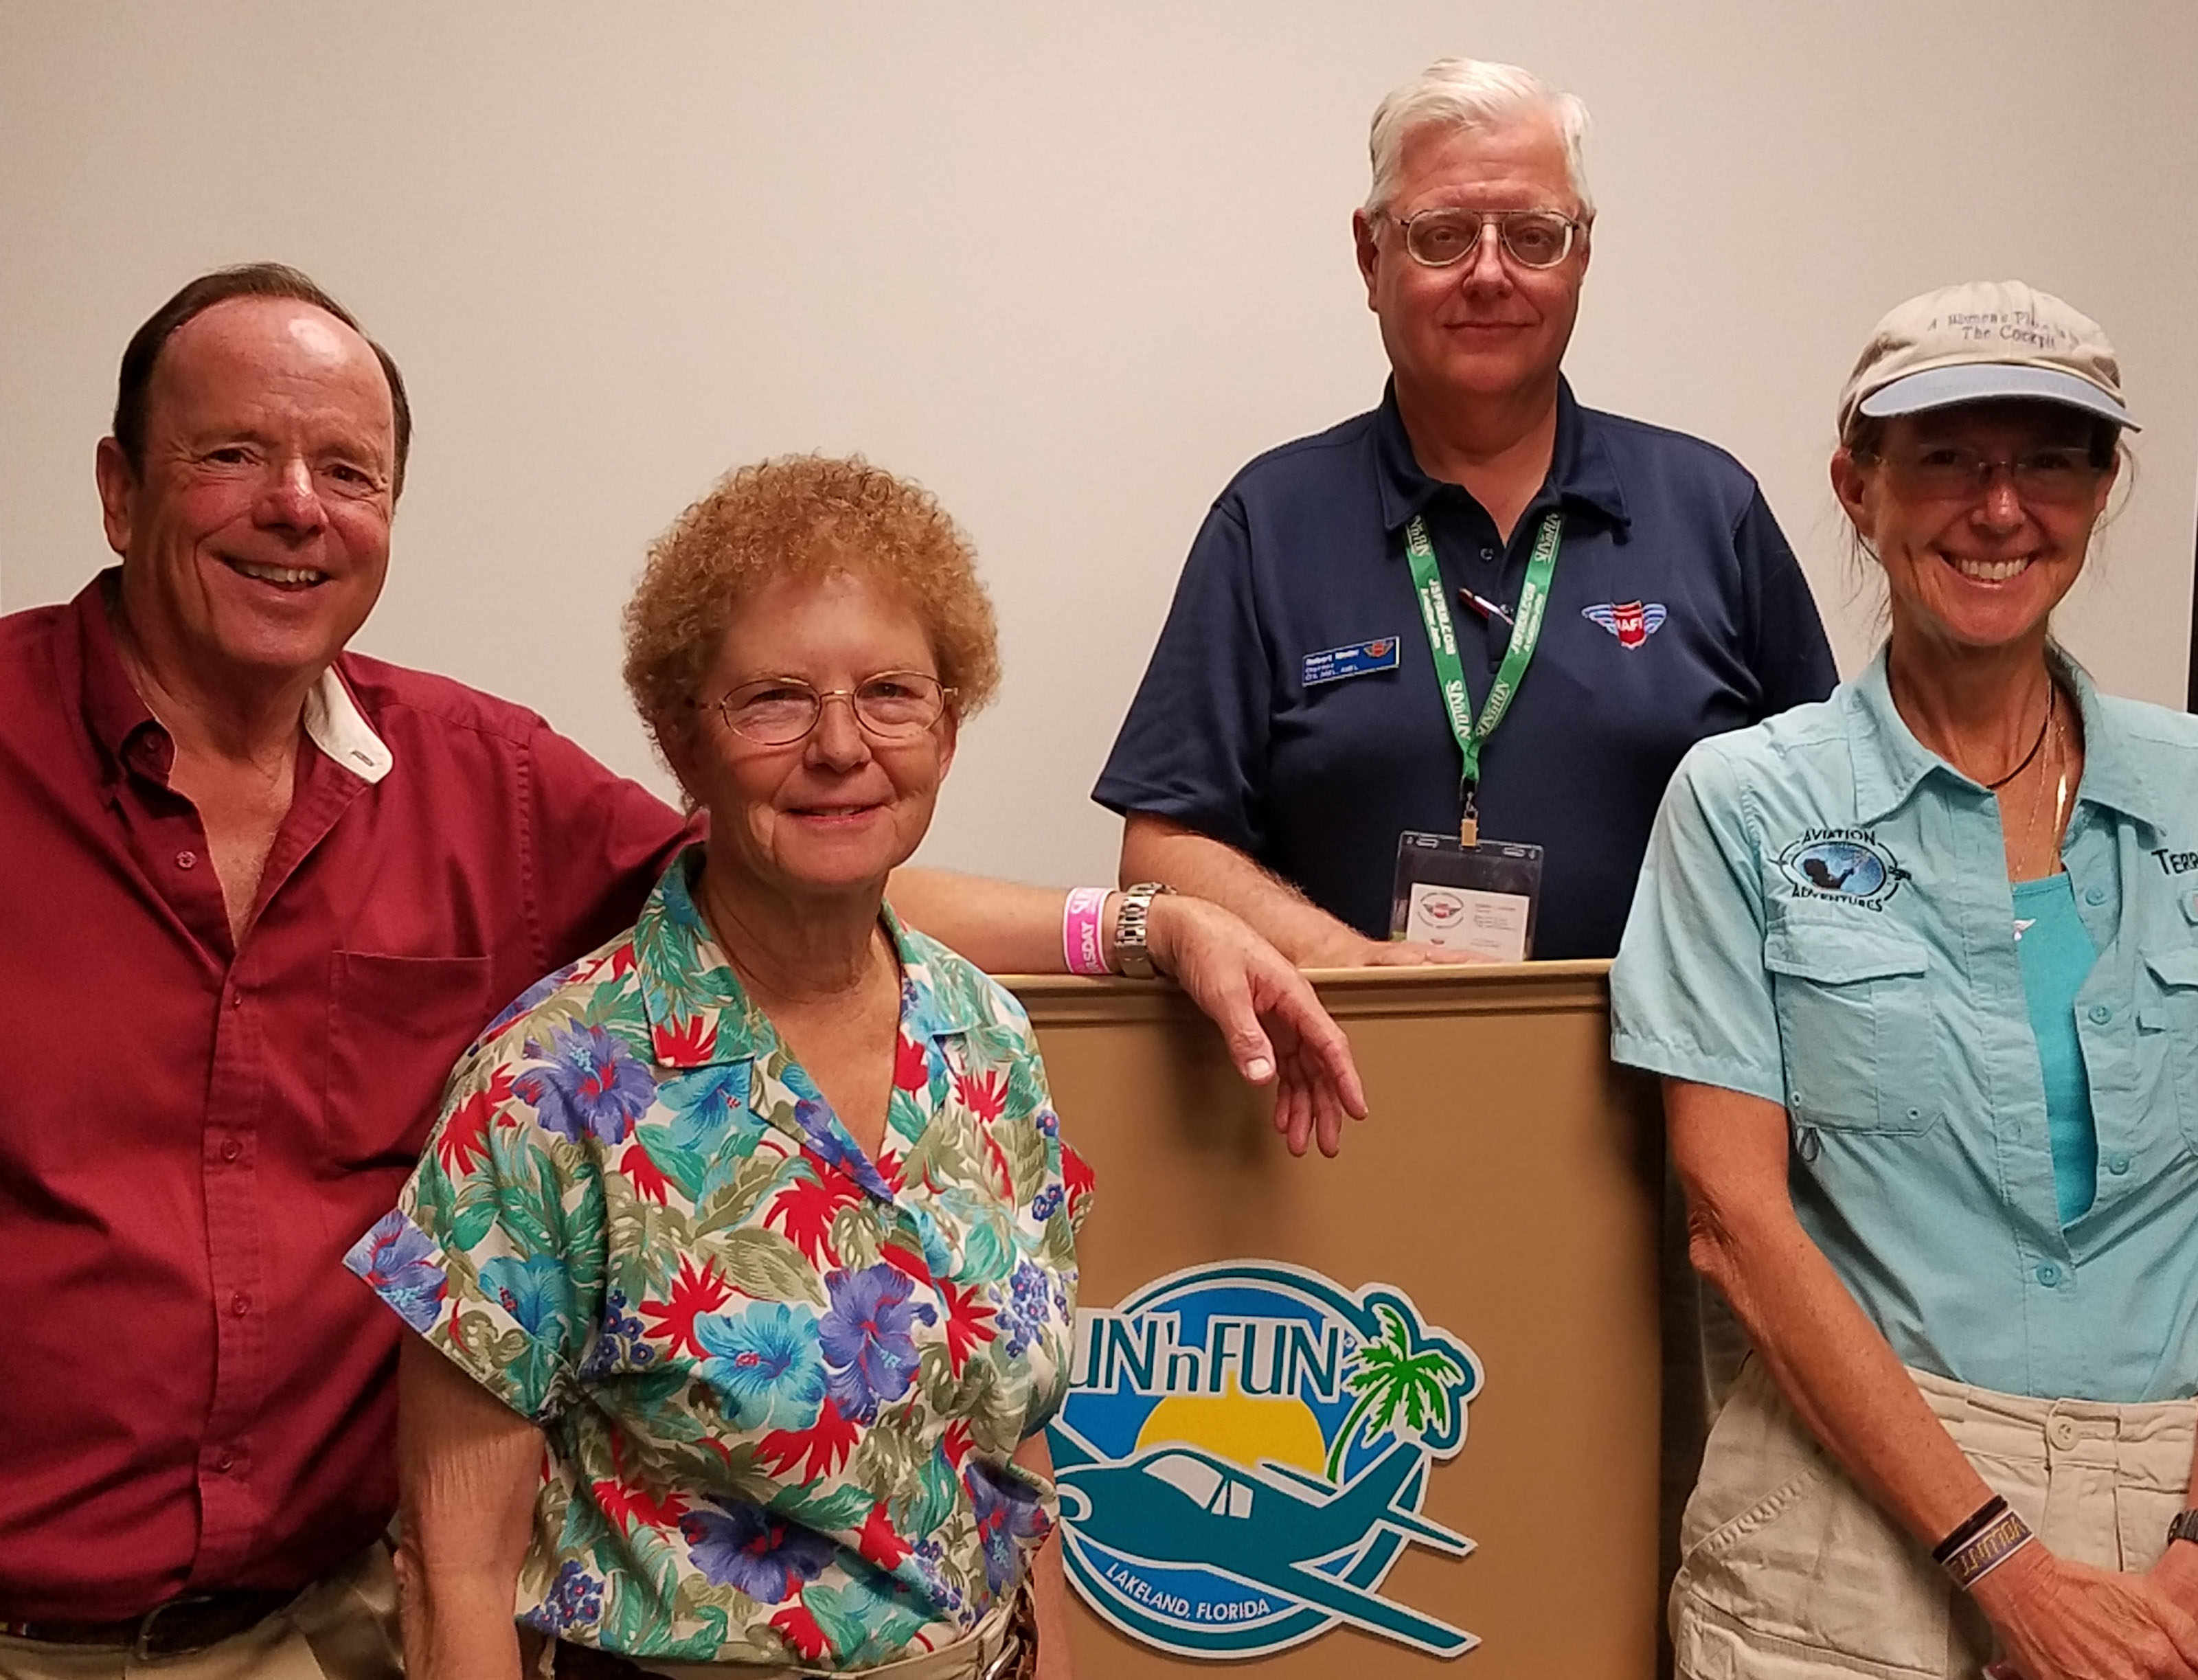 Left to right: John King, Martha King, Robert Meder, and Terry Carbonell. Carbonell, a flight instructor who helps teach youth about aviation, was awarded the first NAFI/King Schools scholarship April 6.